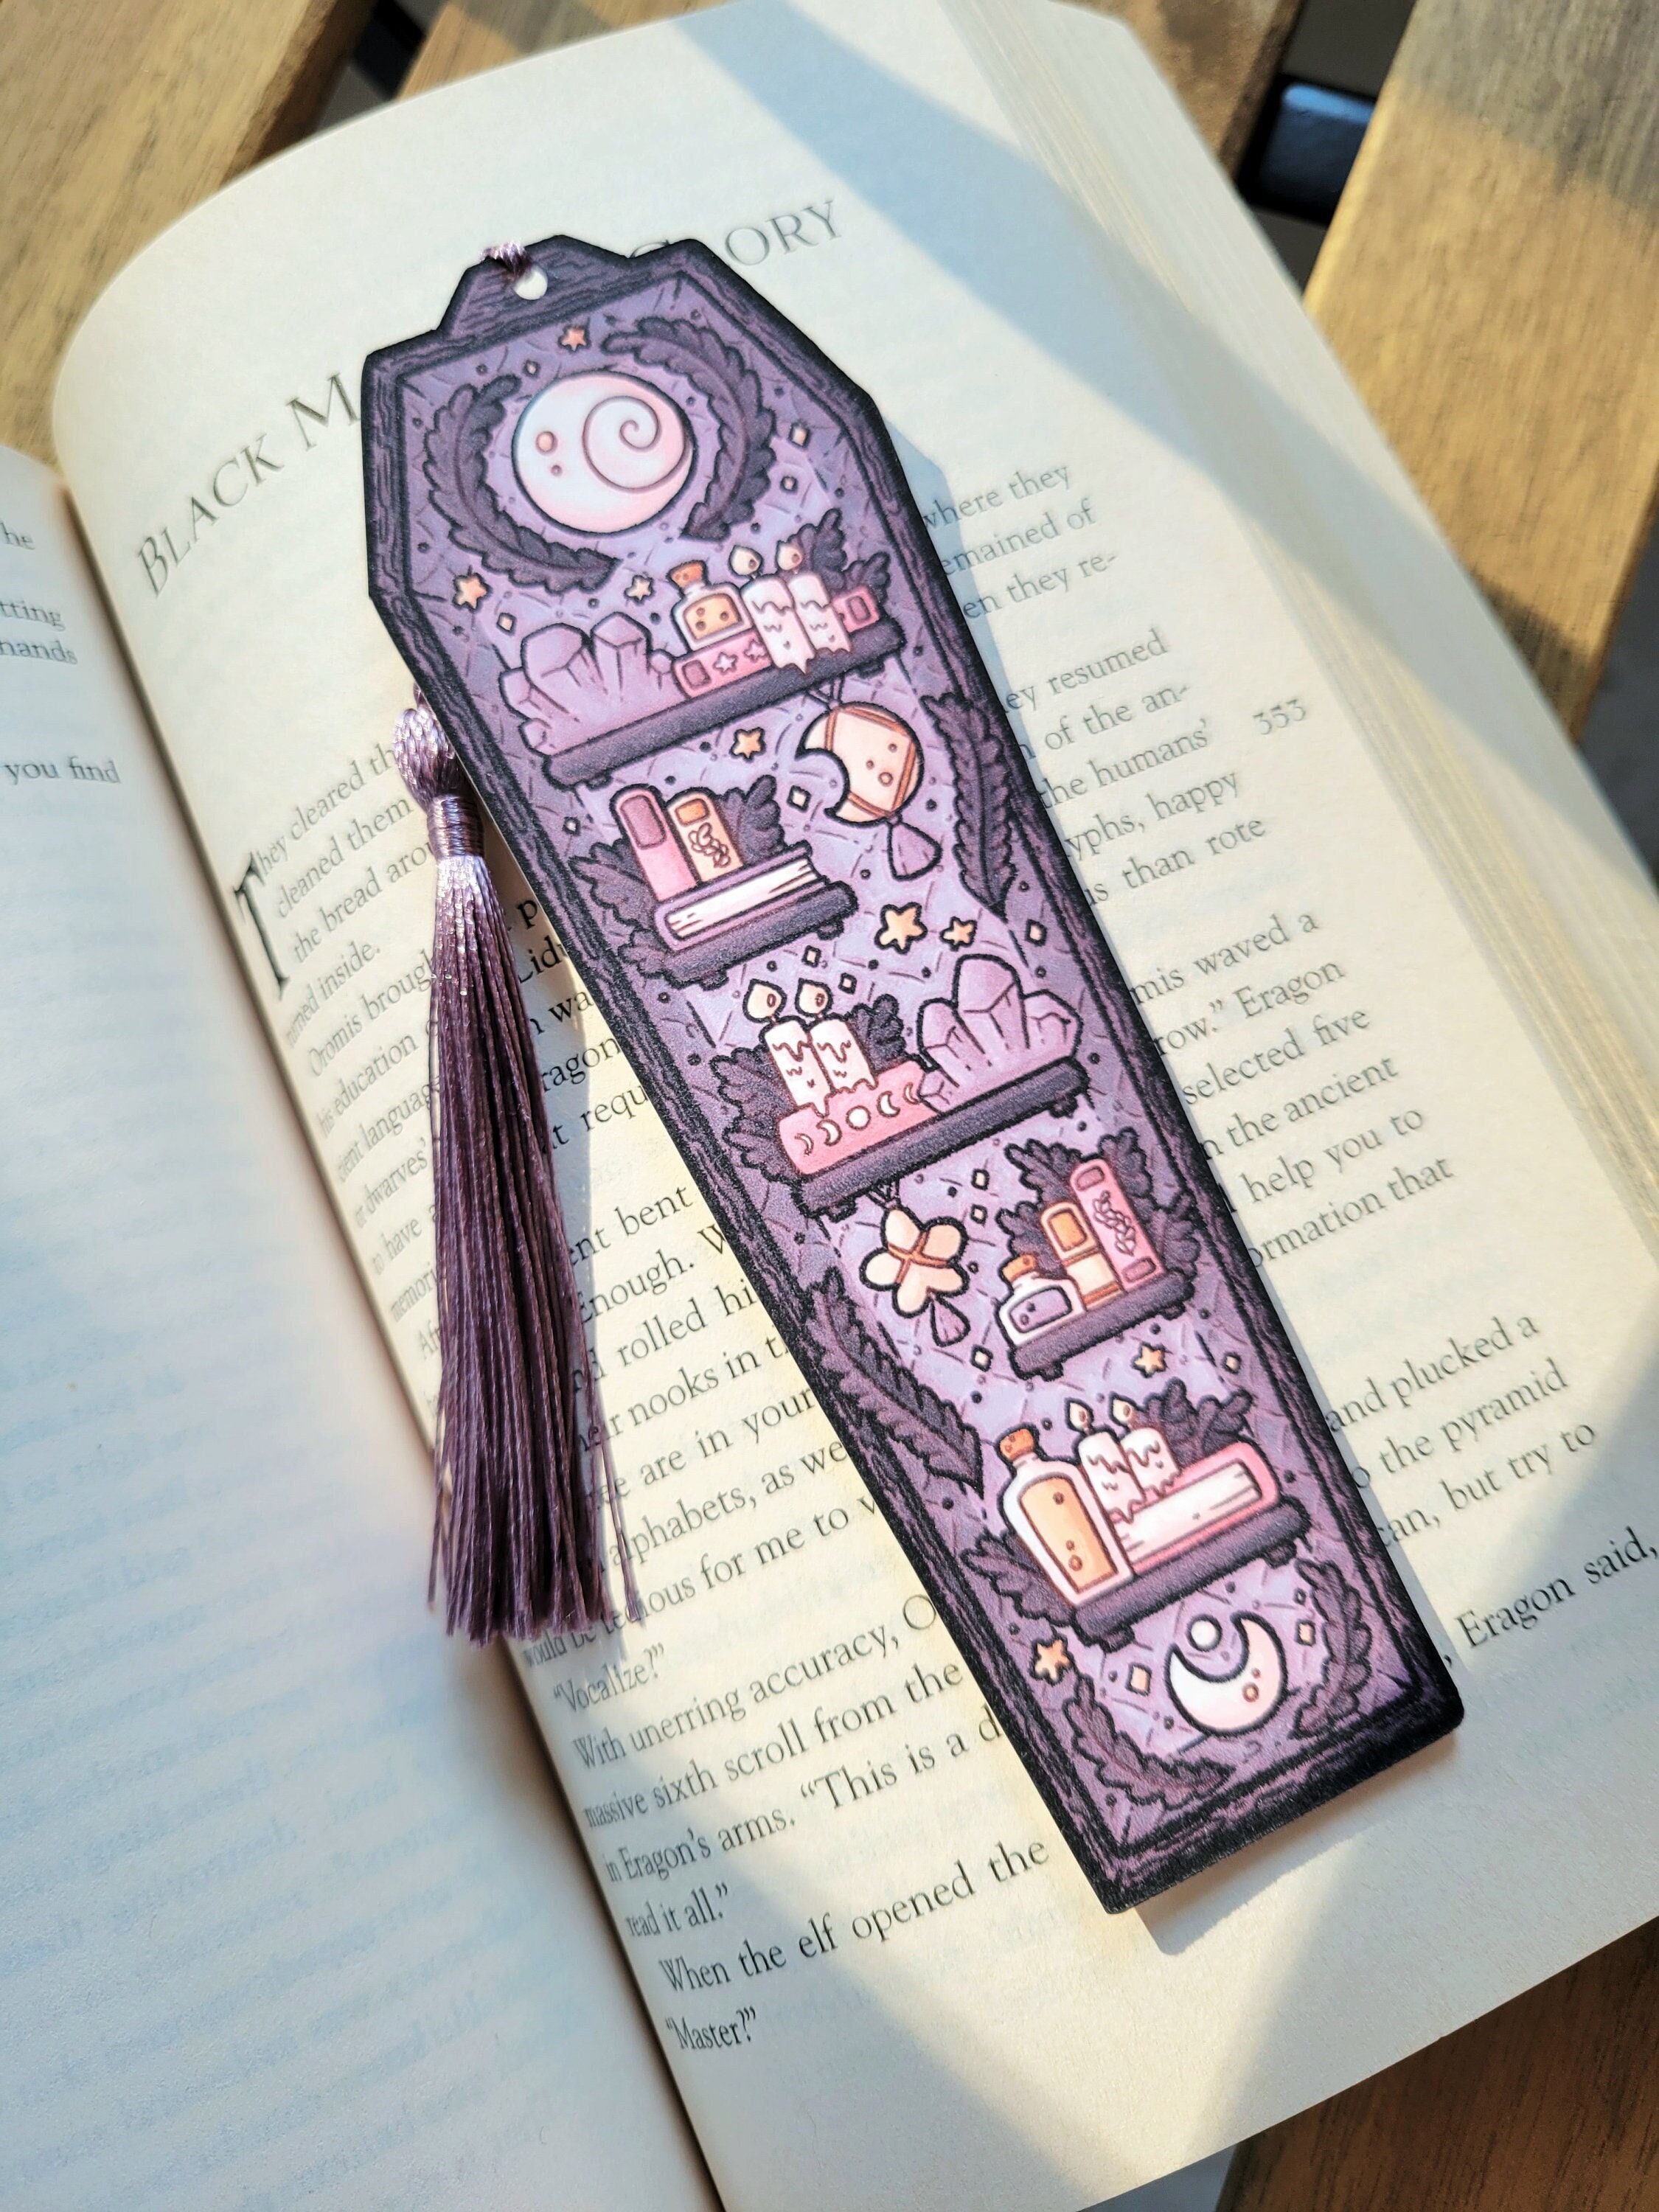 Mushroom Bookmark Books Witchy Herbs Book of Shadows Recycled Botanical  Illustrated Bookmark Paper Boho Vintage Wicca 